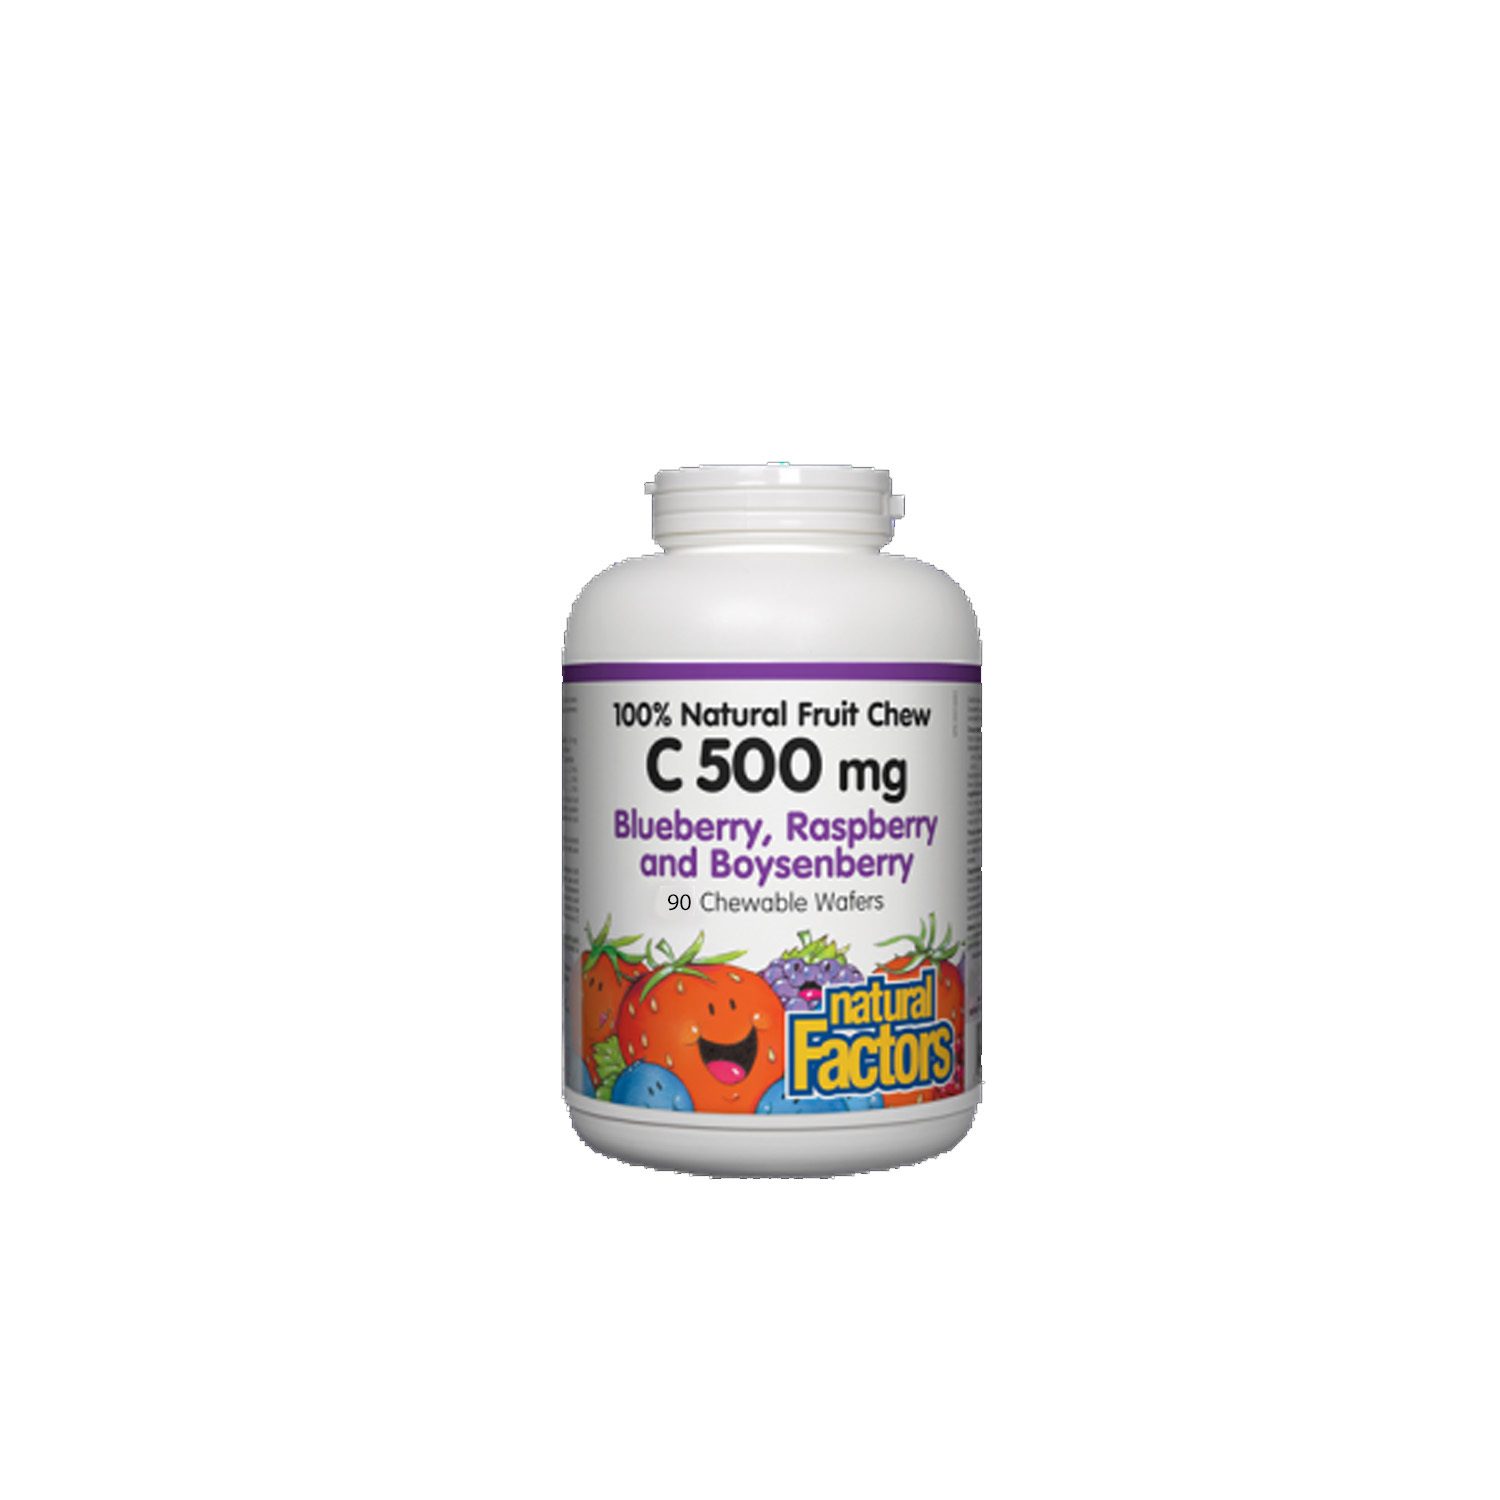 Natural Factors Vitamin C 500mg, 100% Natural Fruit Chew, Blueberry, Raspberry,  - $12.05